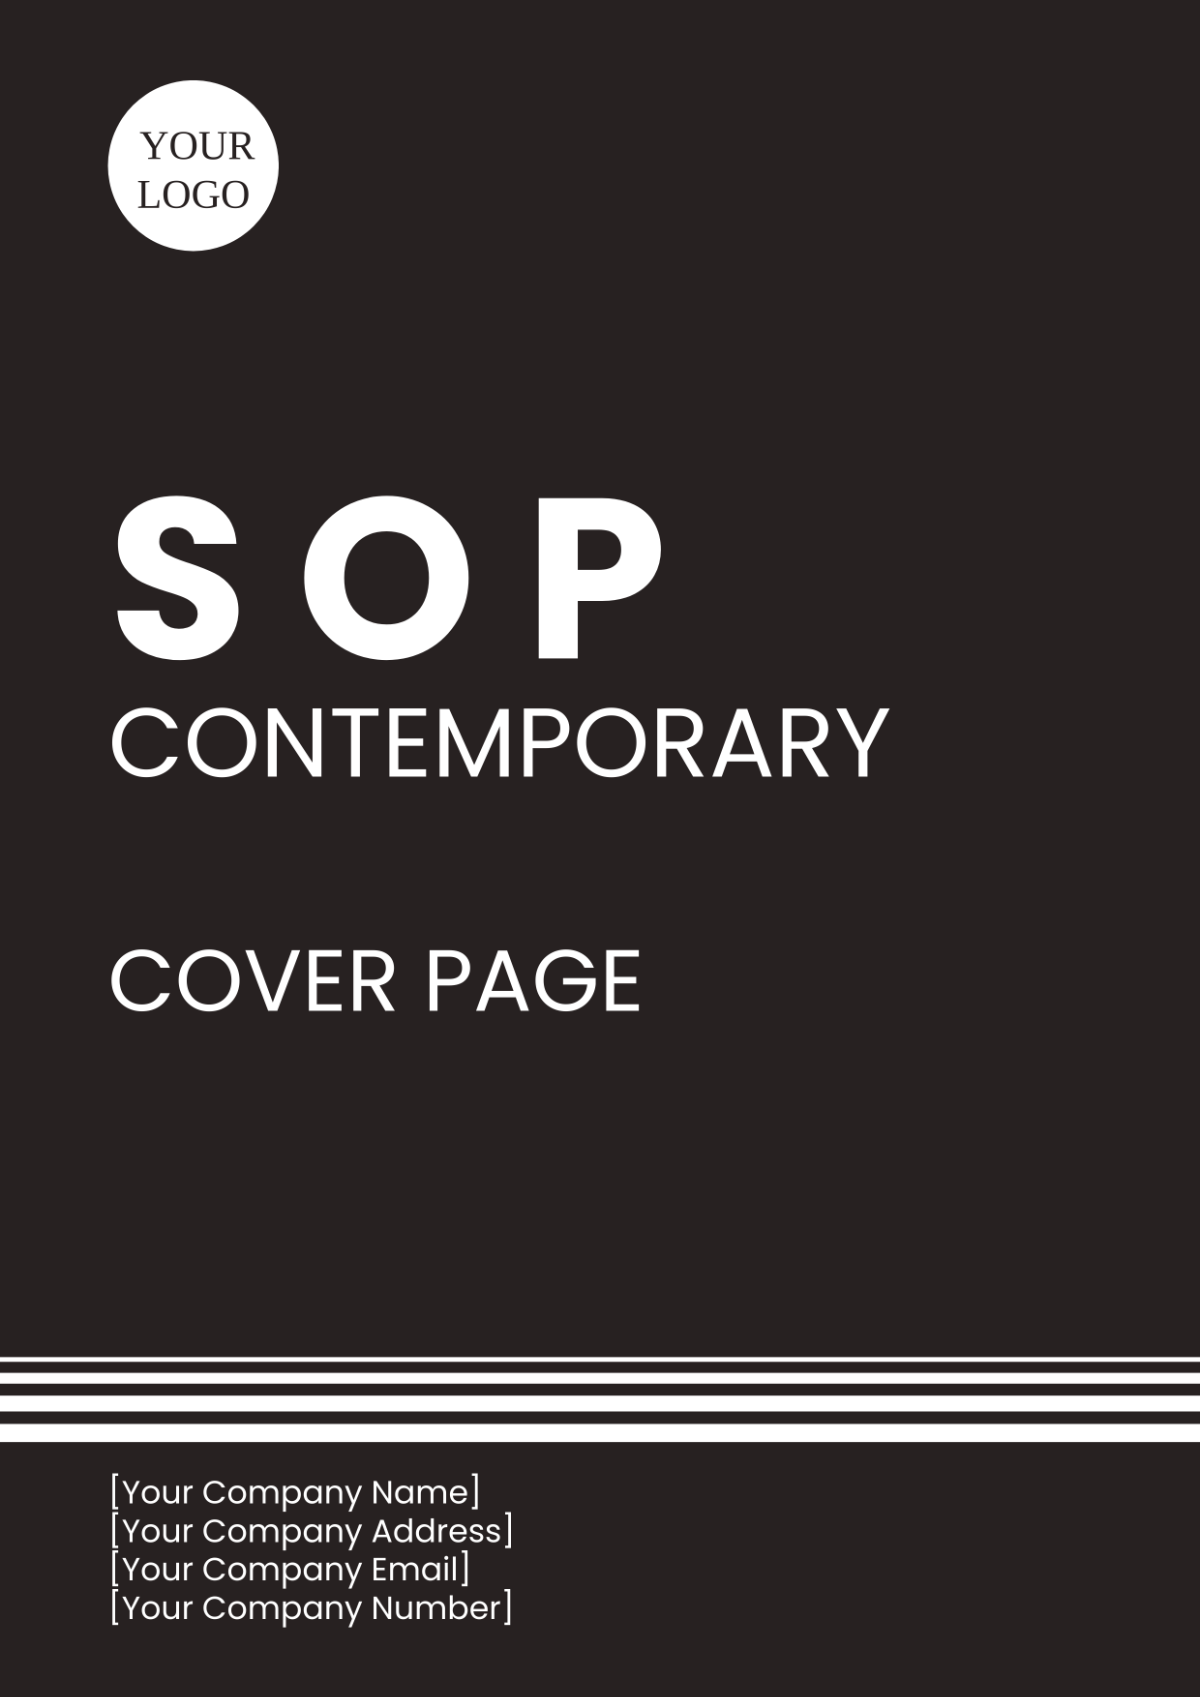 SOP Contemporary Cover Page